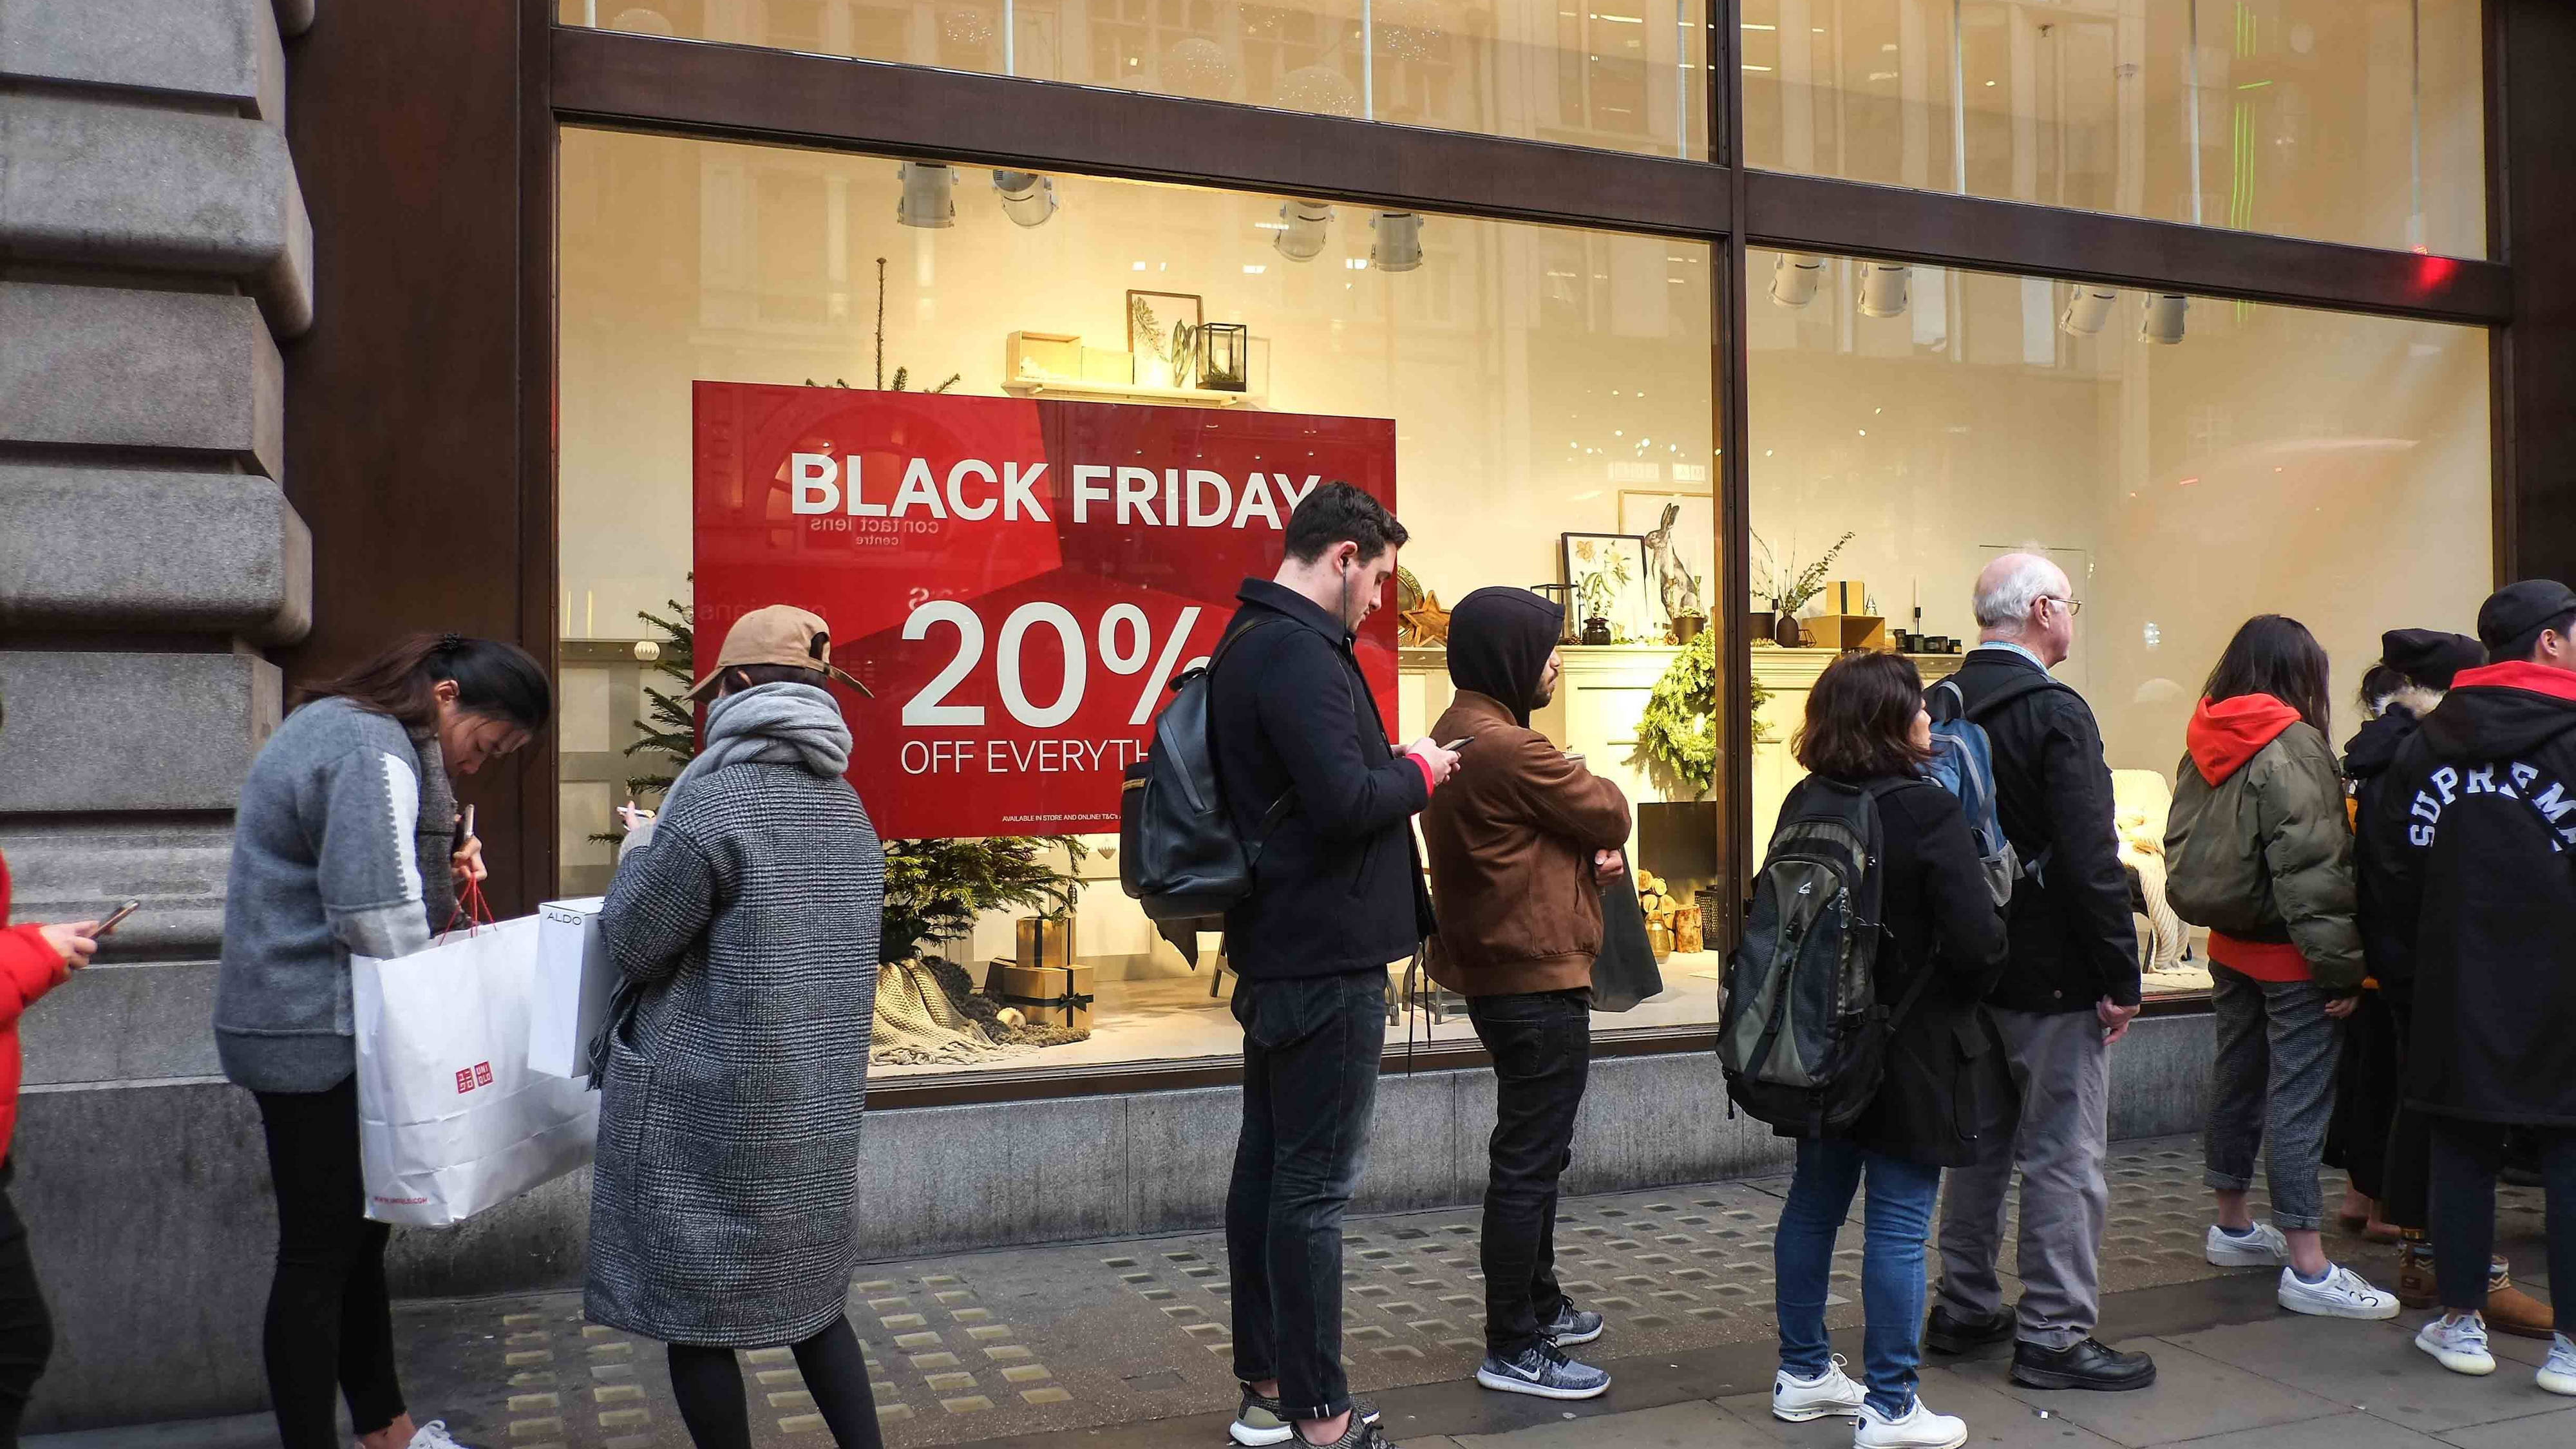 Black Friday 2018 Uk Deals Starting Now Amazon Argos Now Tv And More Heart